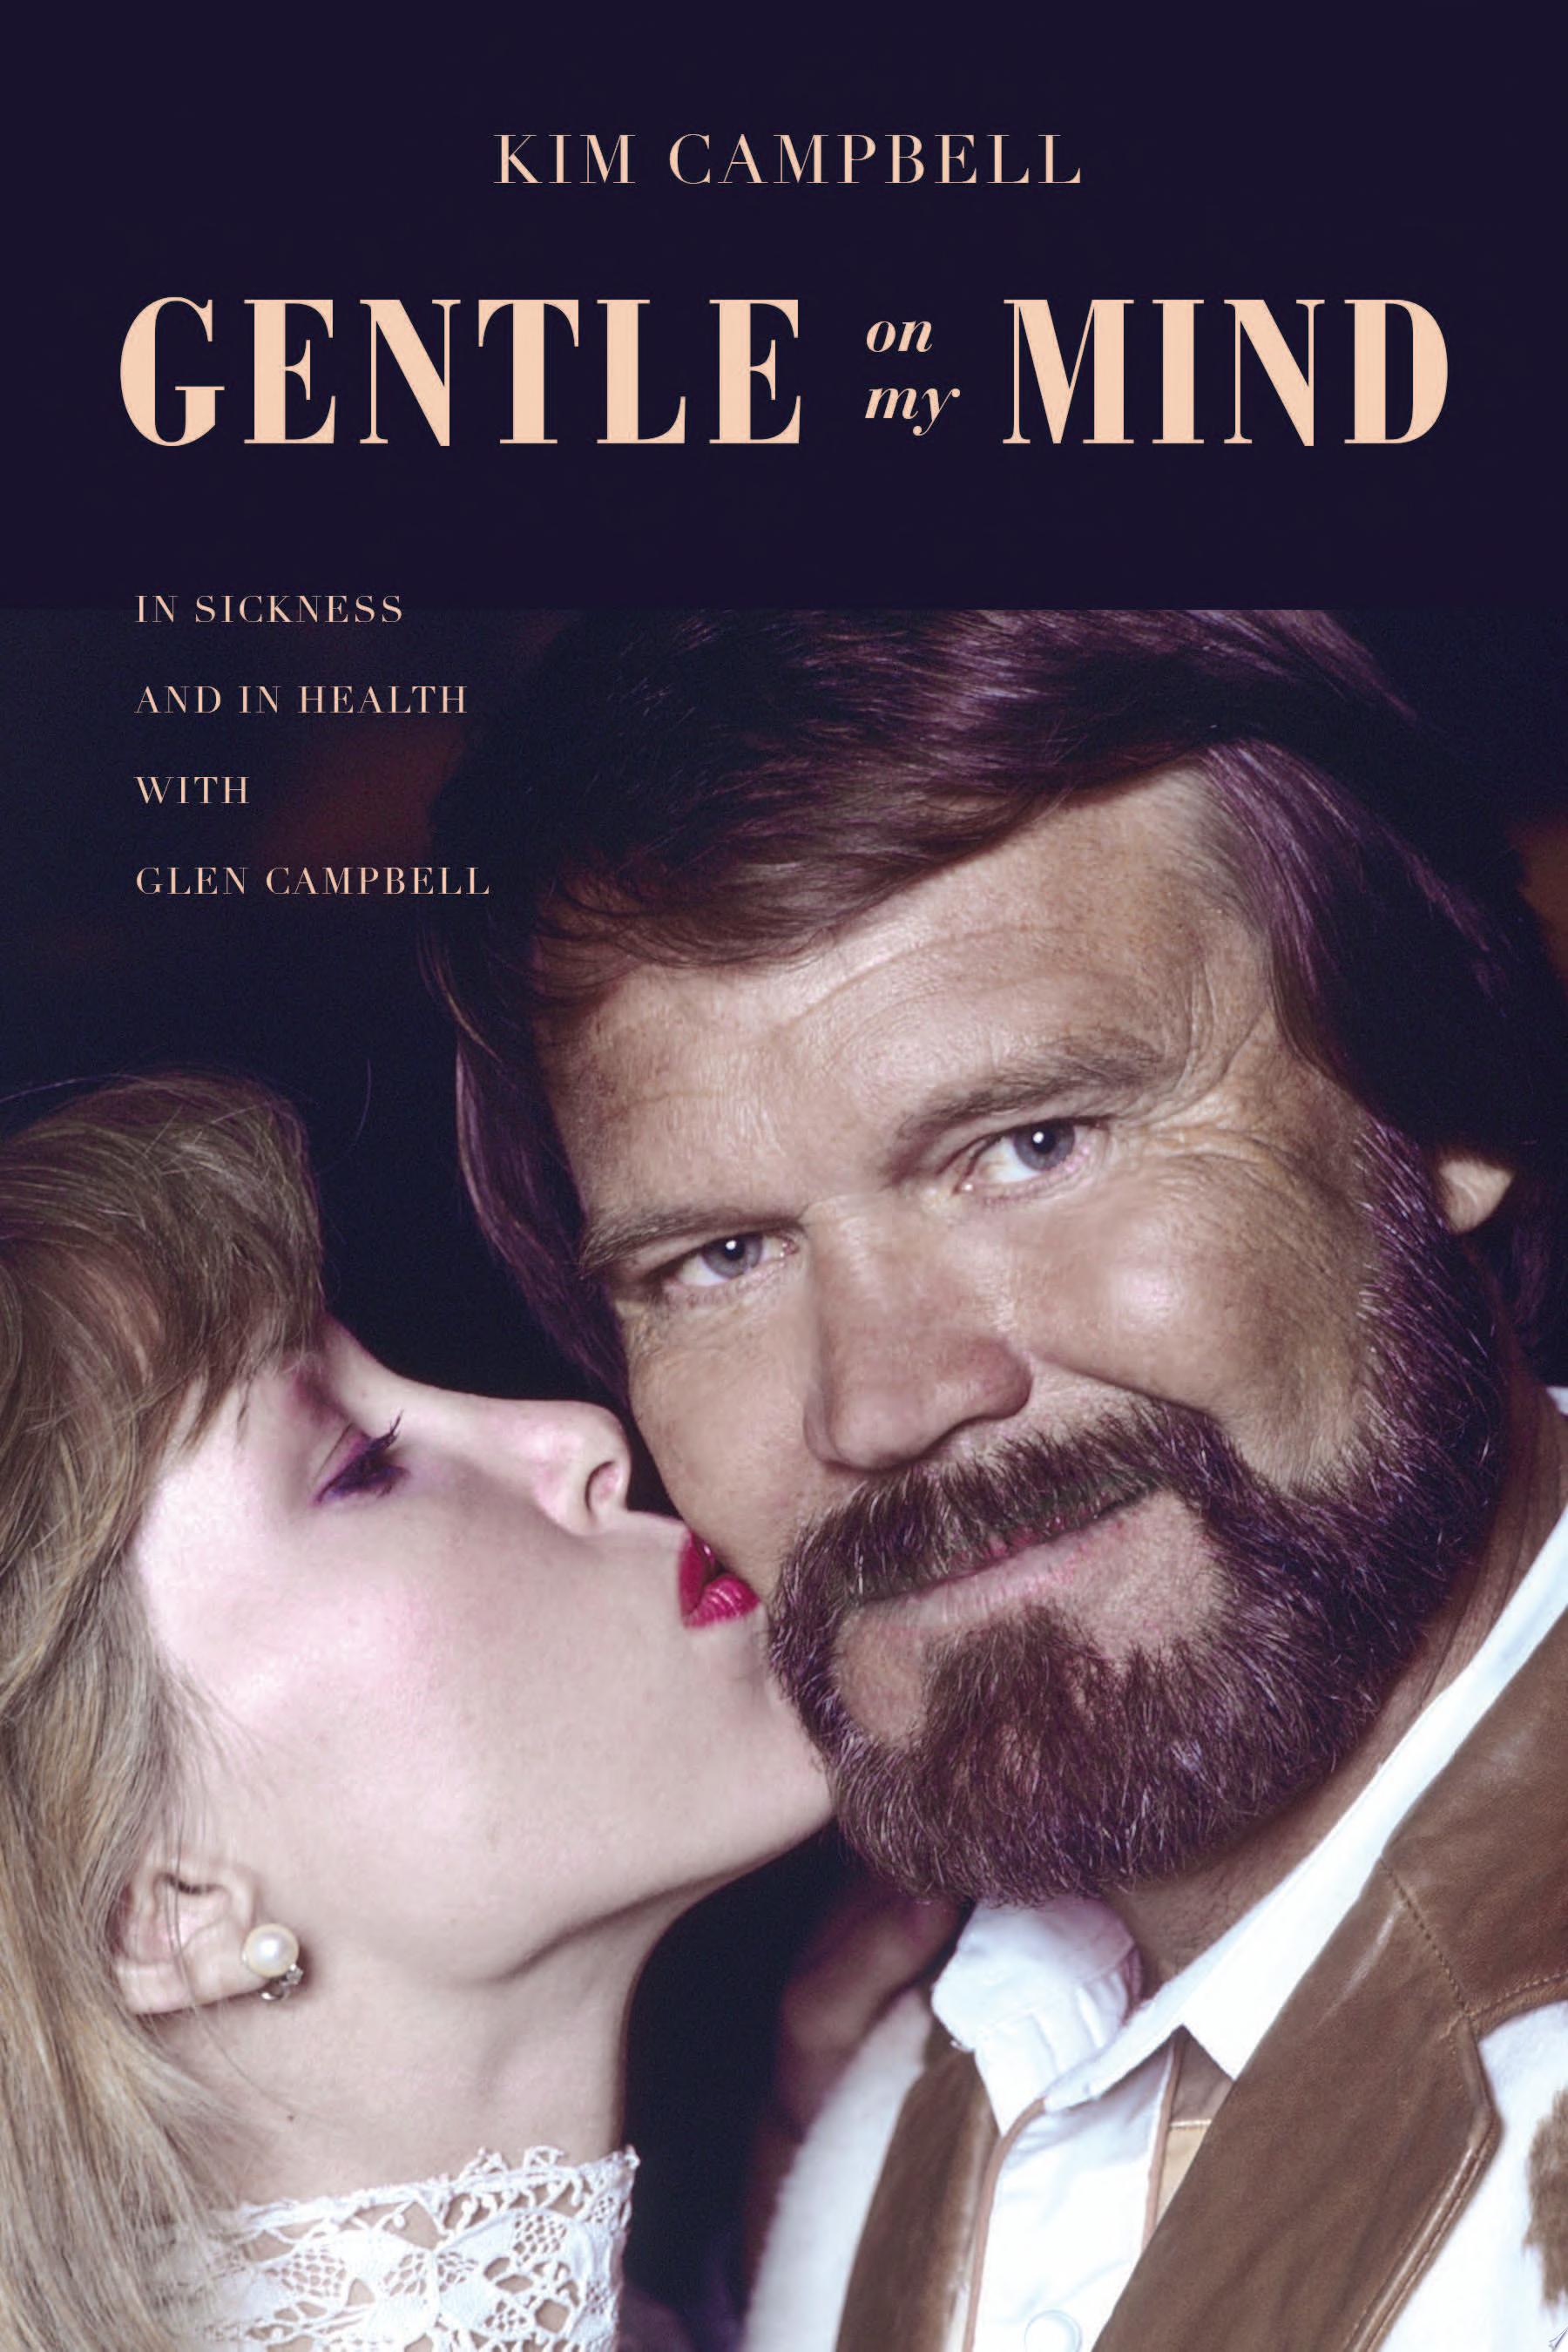 Image for "Gentle on My Mind"